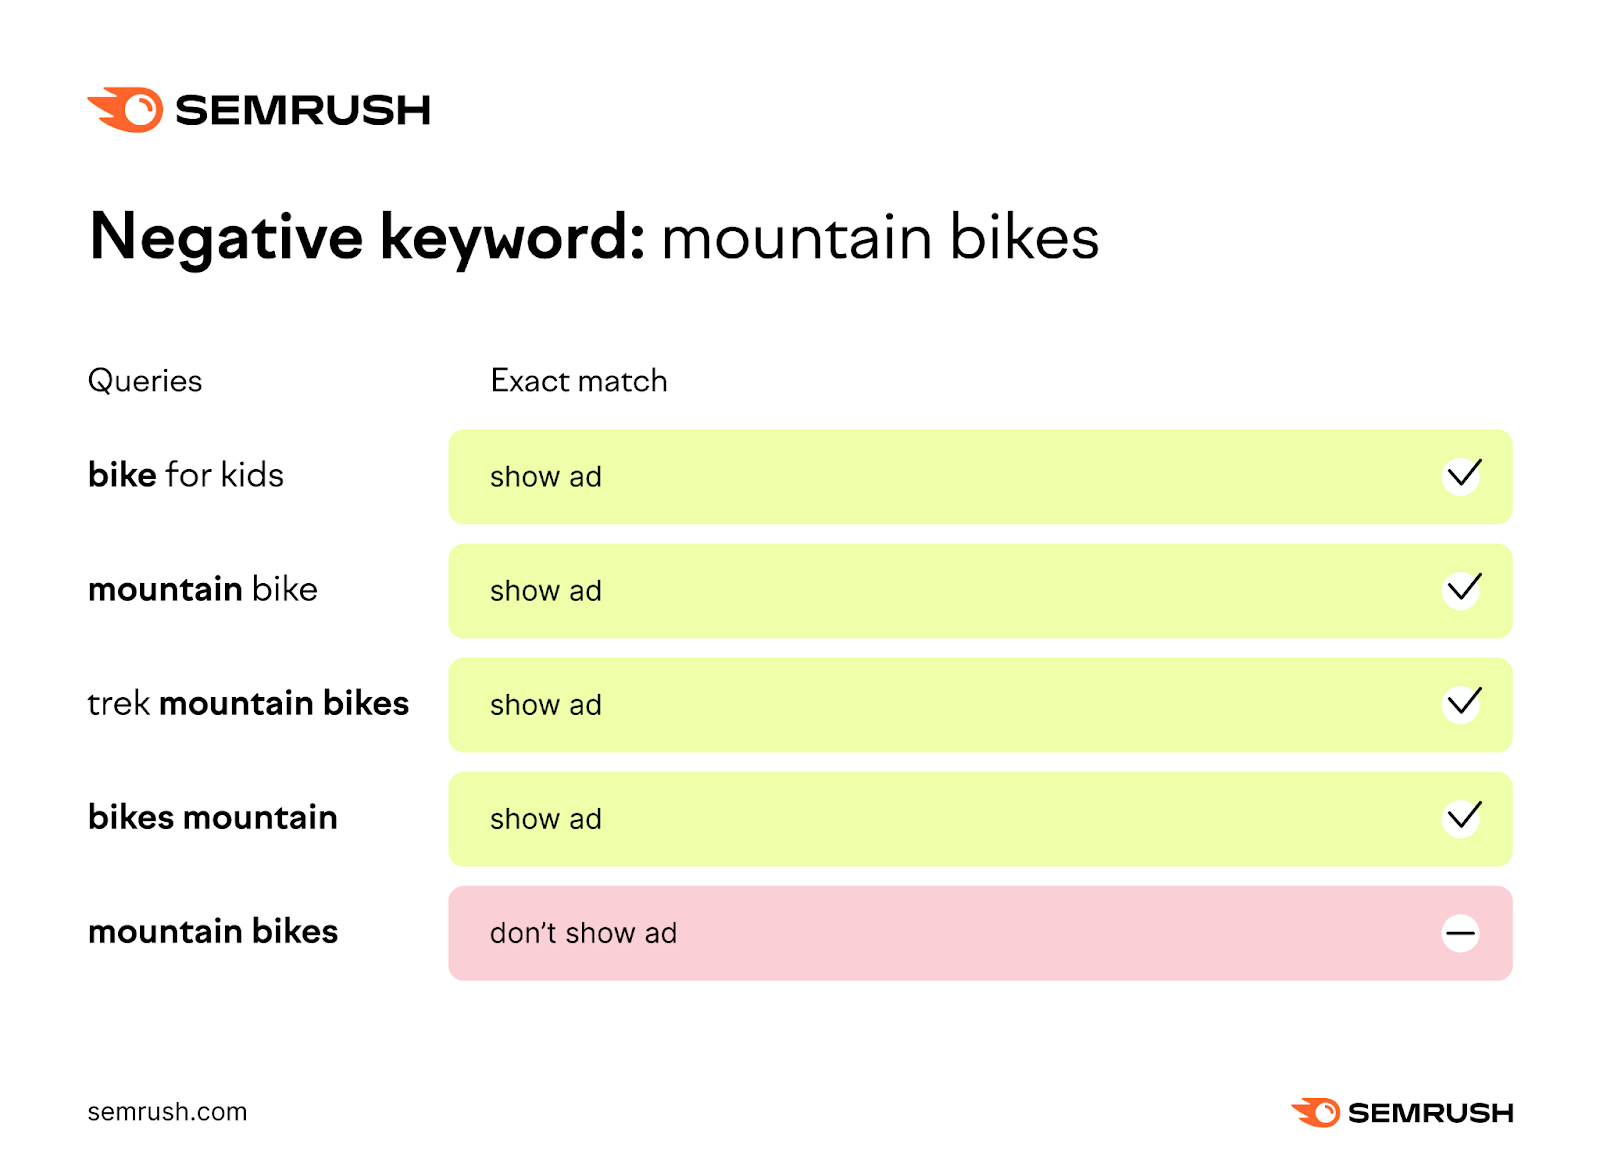 a visual example of "negative keyword: mountains" bike showing examples for different queries and exact matches